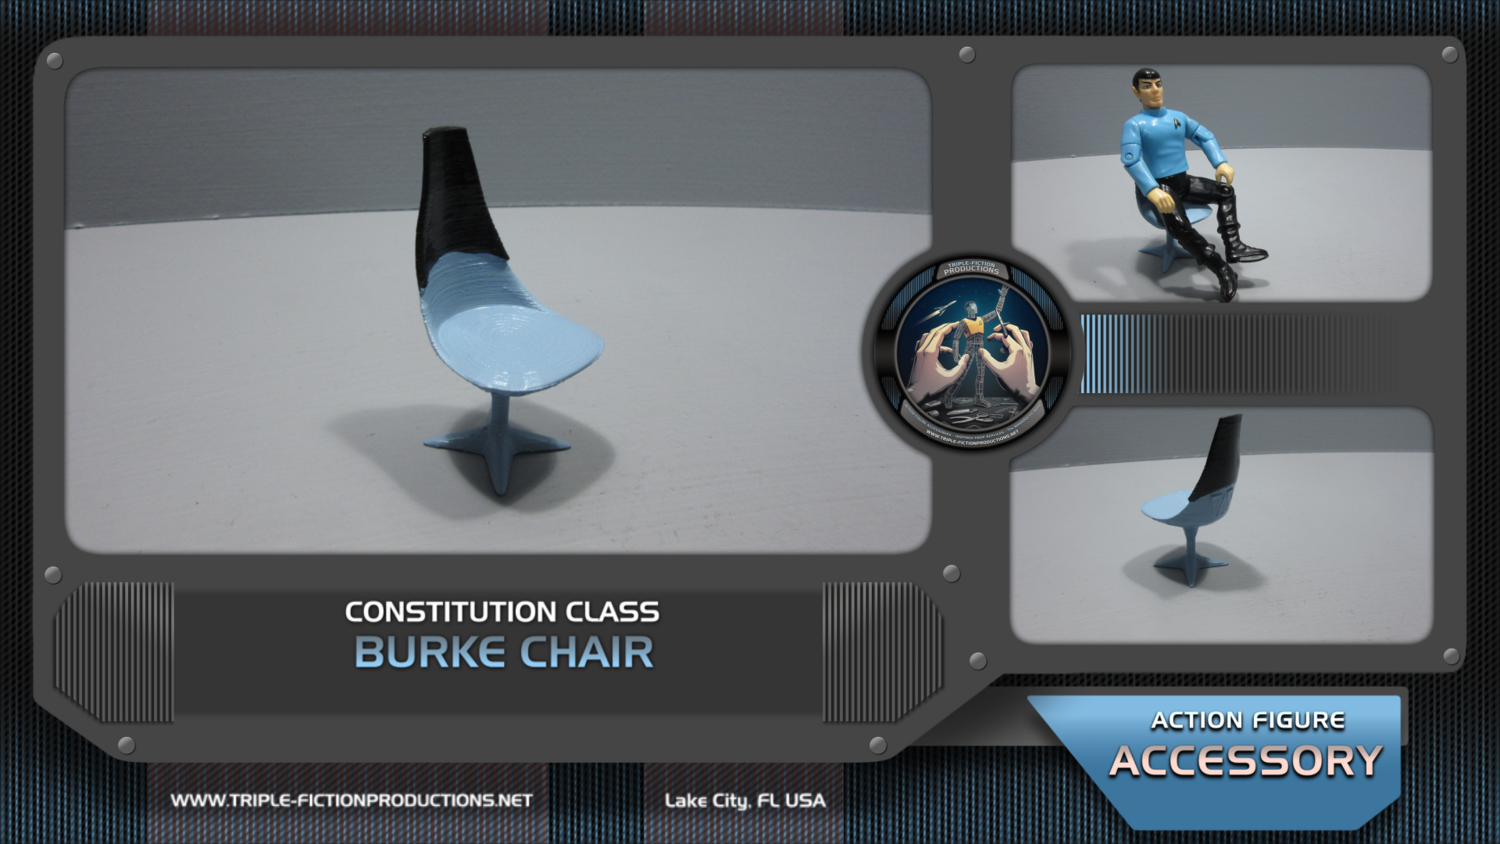 Constitution Class - 4.5" Scale - Burke Chair